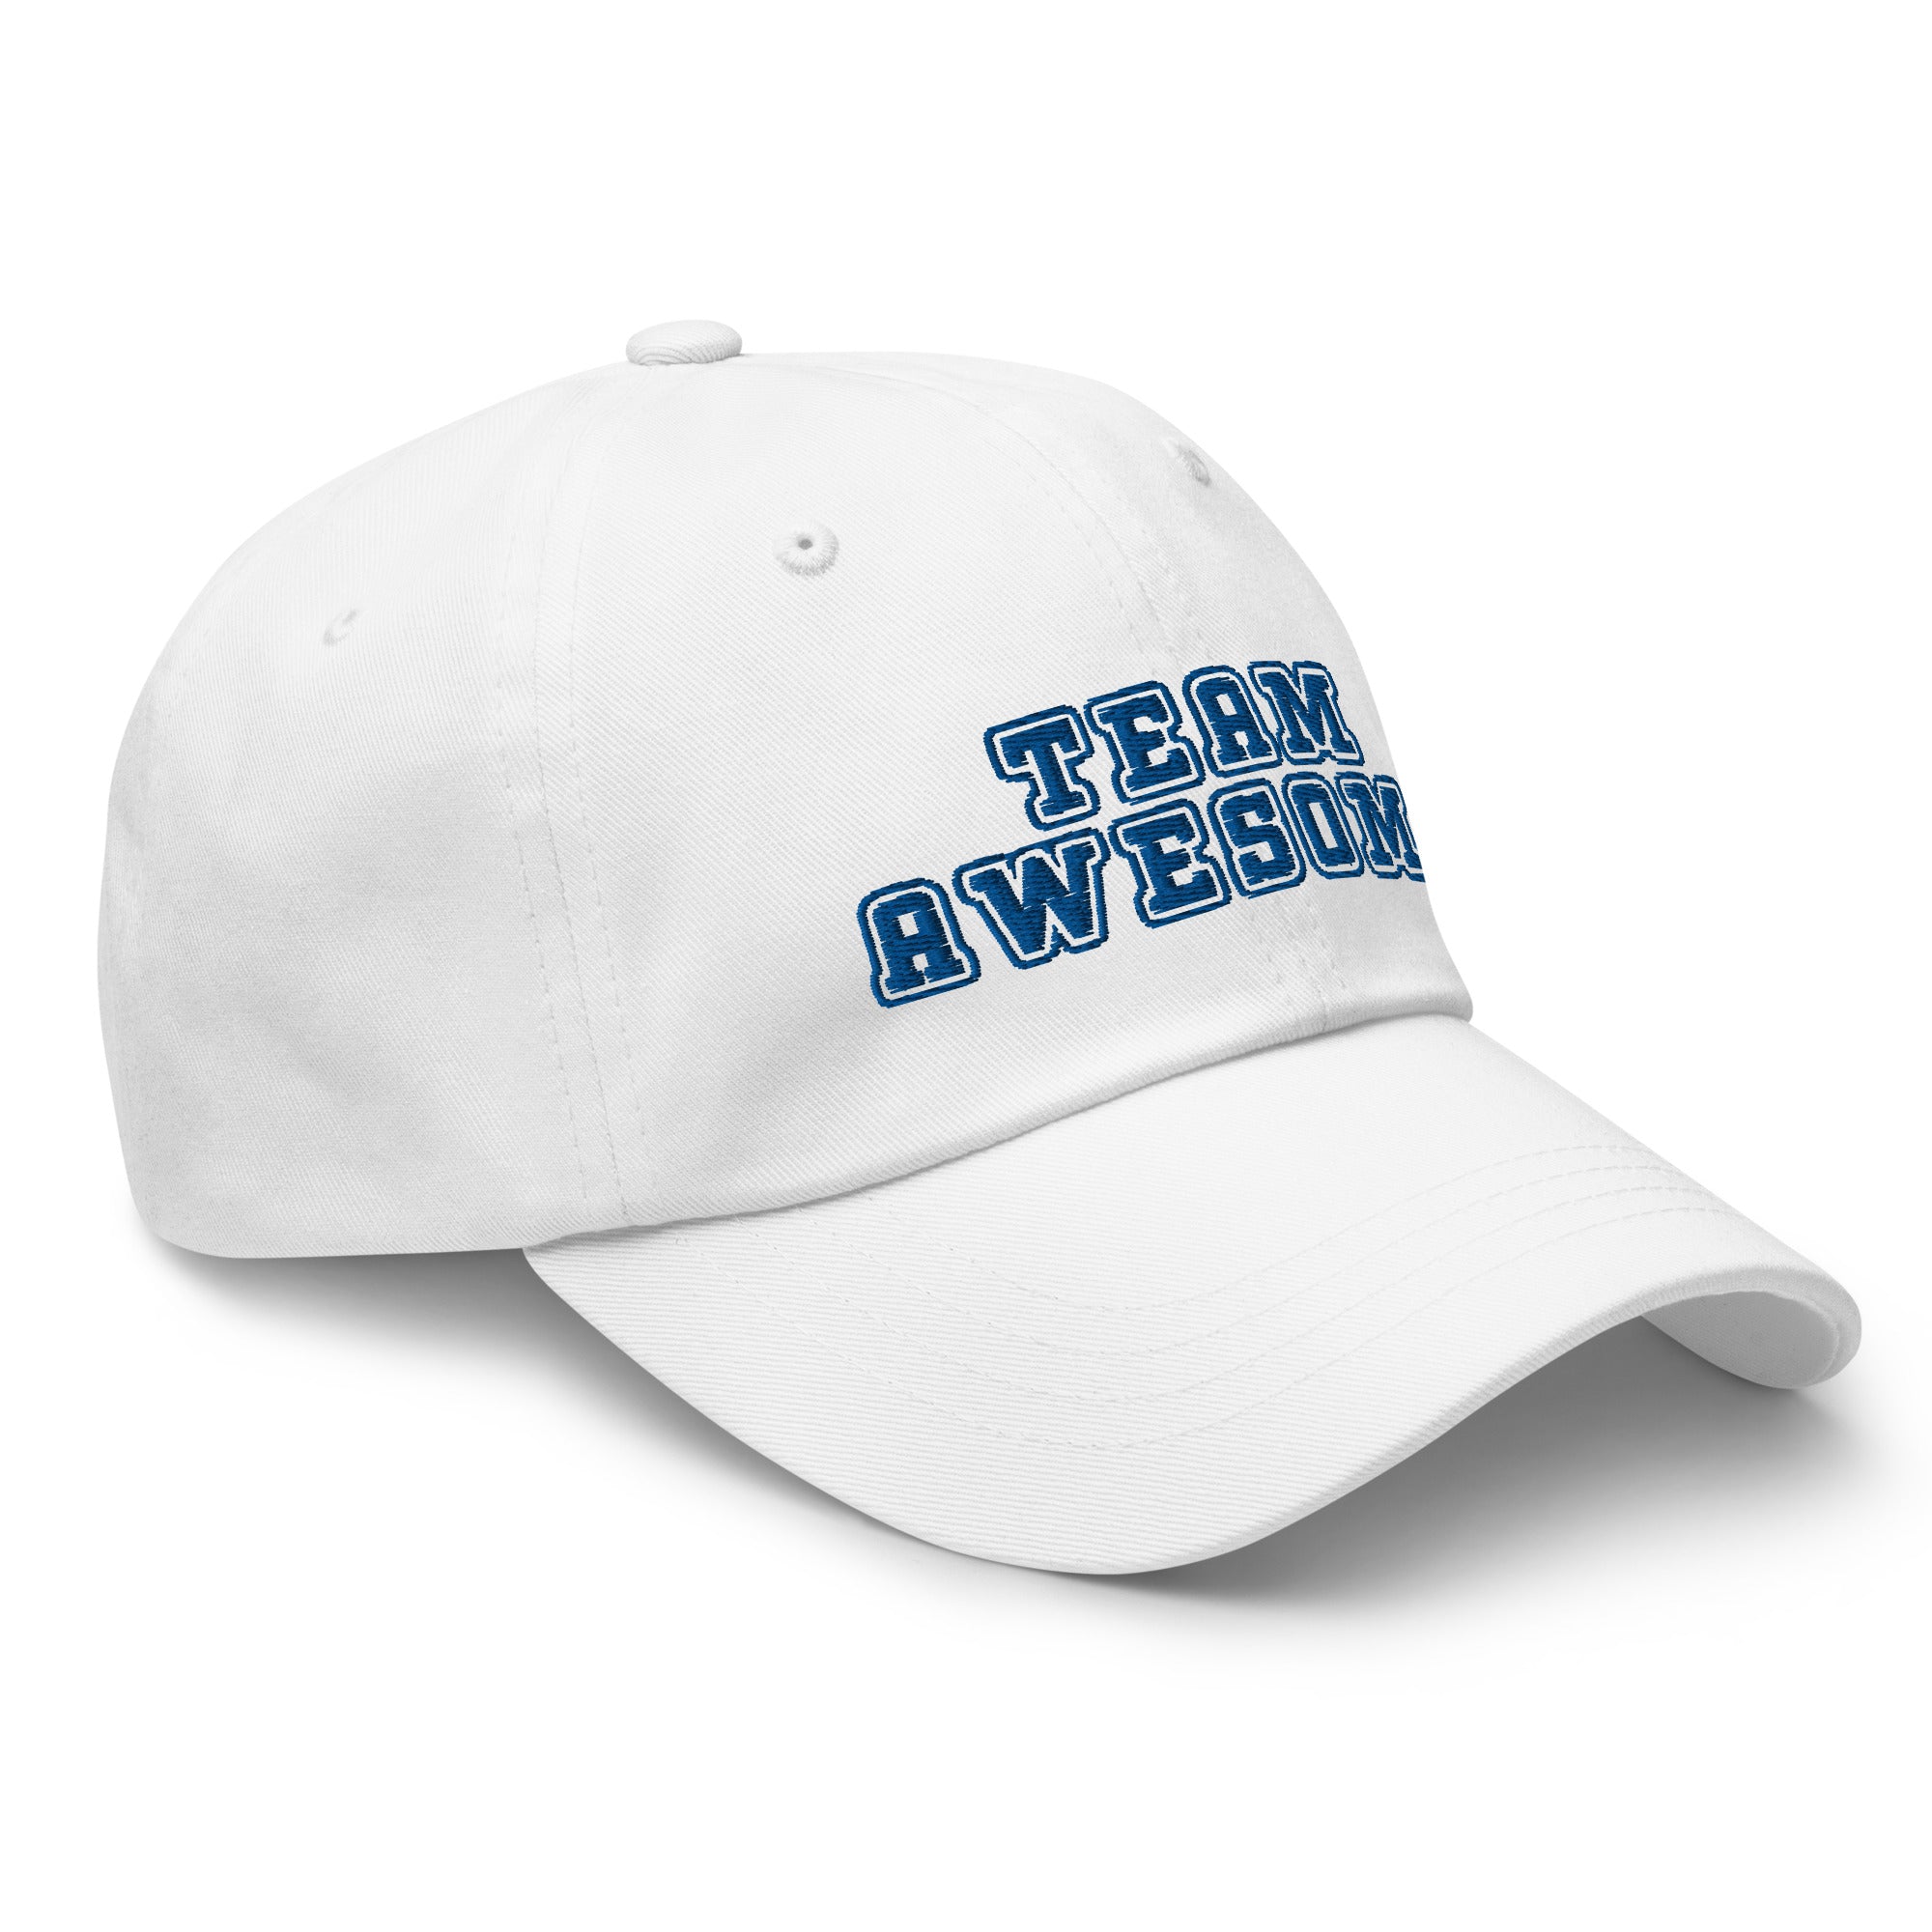 Team Awesome Dad Hat